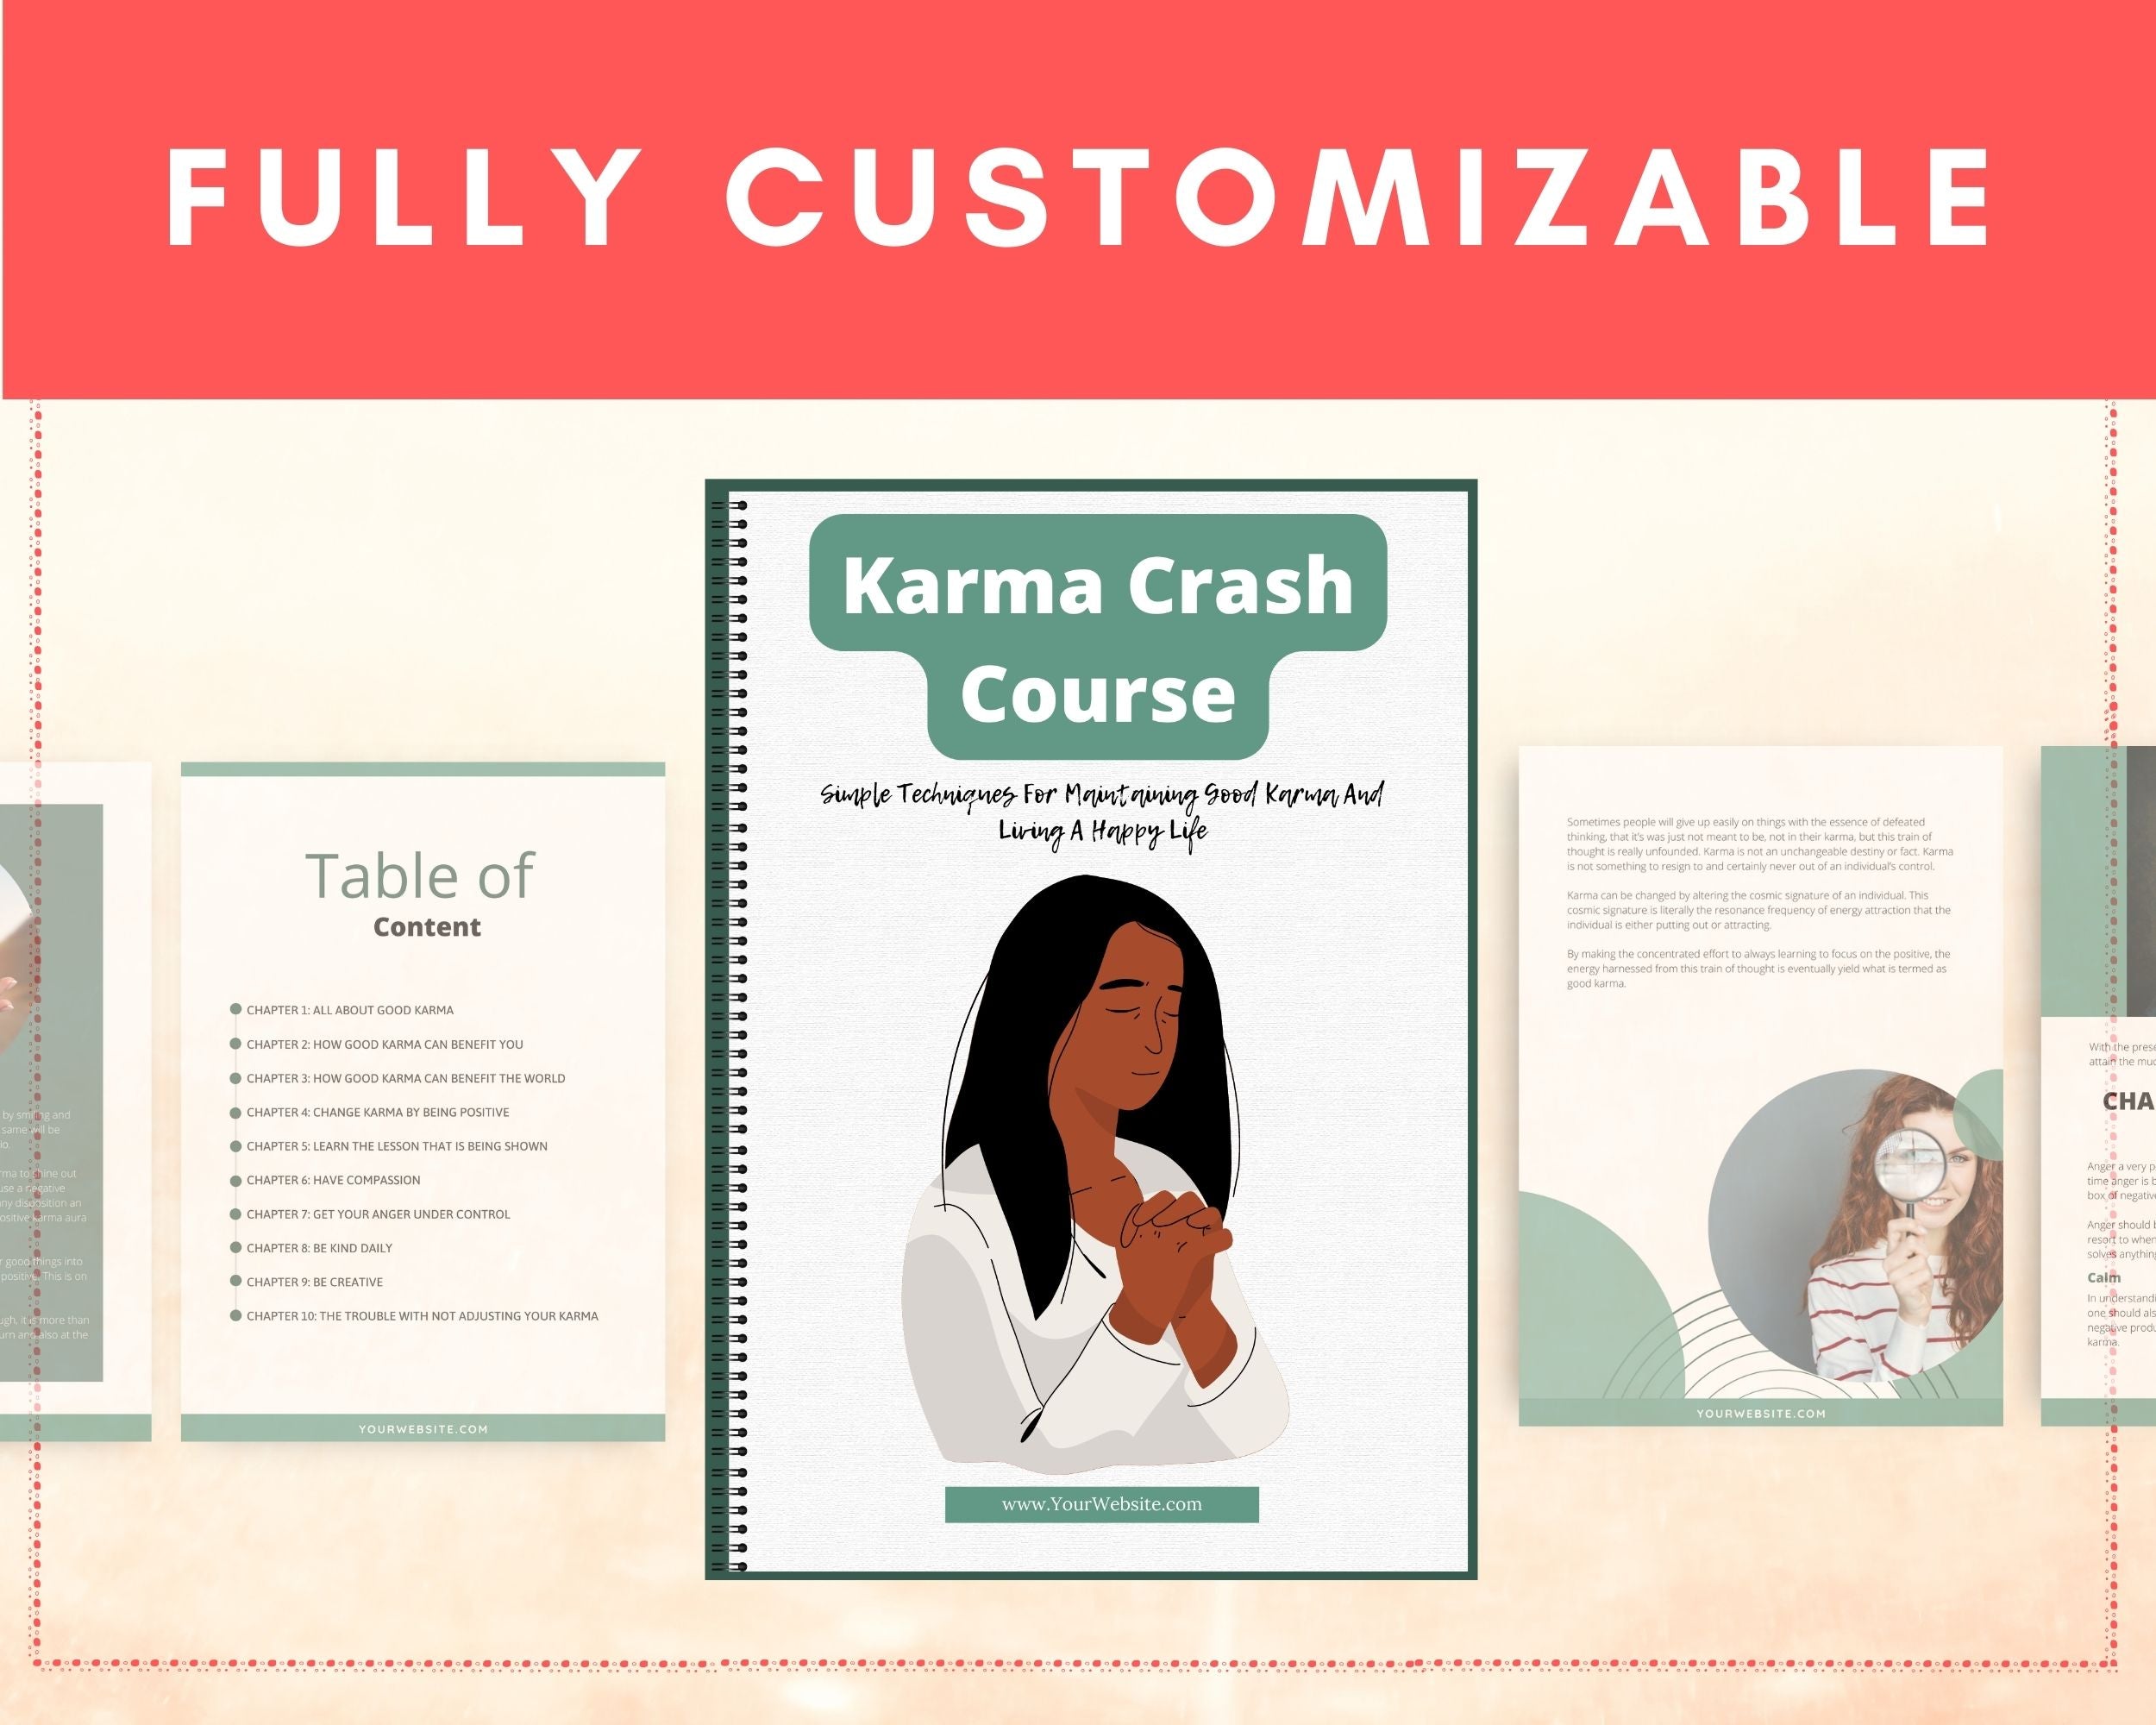 Editable Karma Crash Course Mini Ebook | Done-for-You Ebook in Canva | Rebrandable and Resizable Canva Template